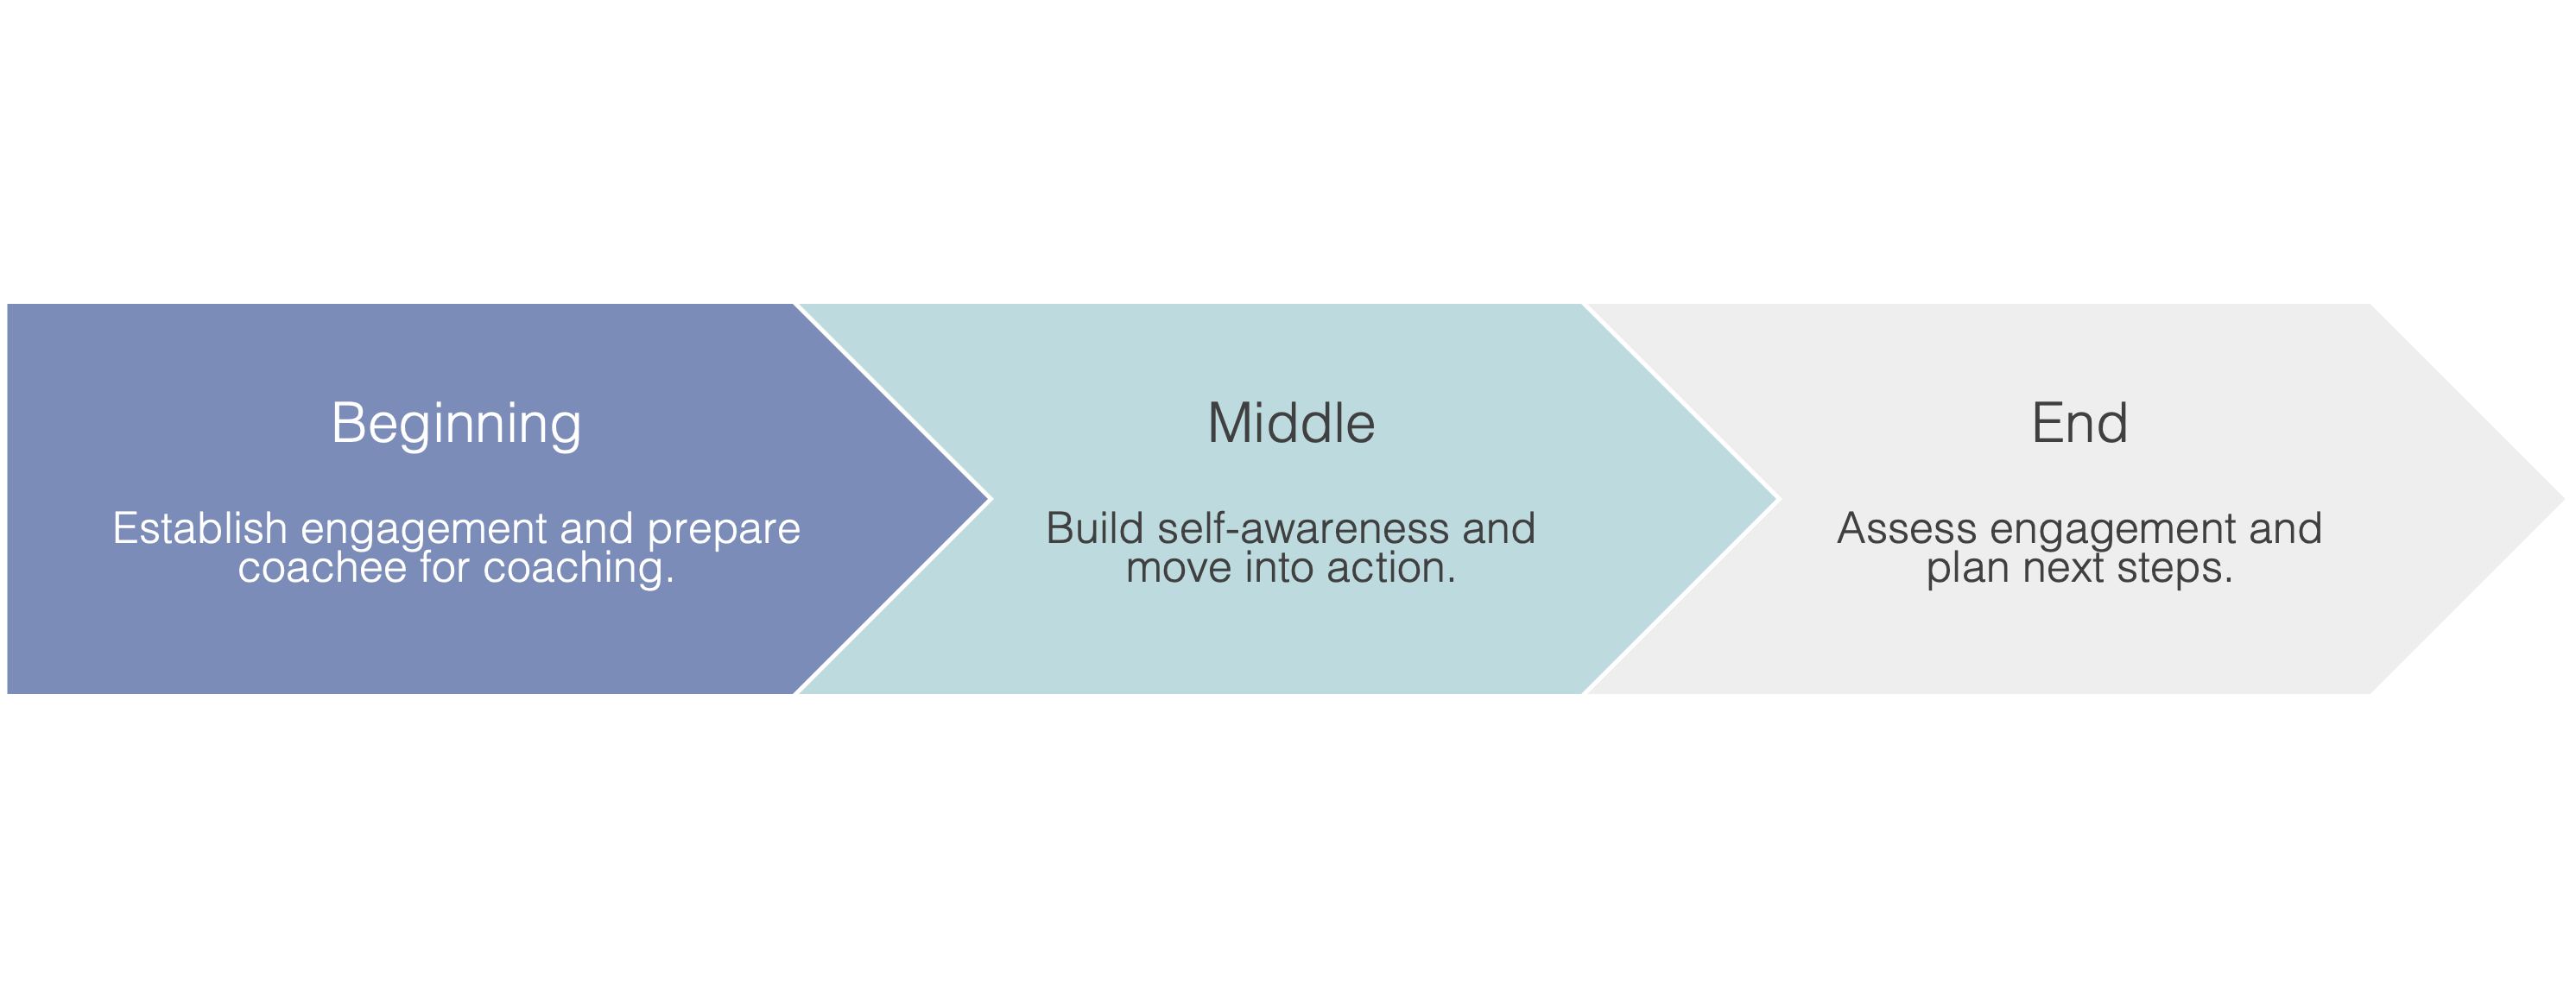 A graphic containing three arrow-shaped boxes that feed into each other. The left box reads: "Beginning: Establish engagement and prepare coachee for coaching." The middle box reads: "Middle: Build self-awareness and move into action." The right box reads: "End: Assess engagement and plan next steps."